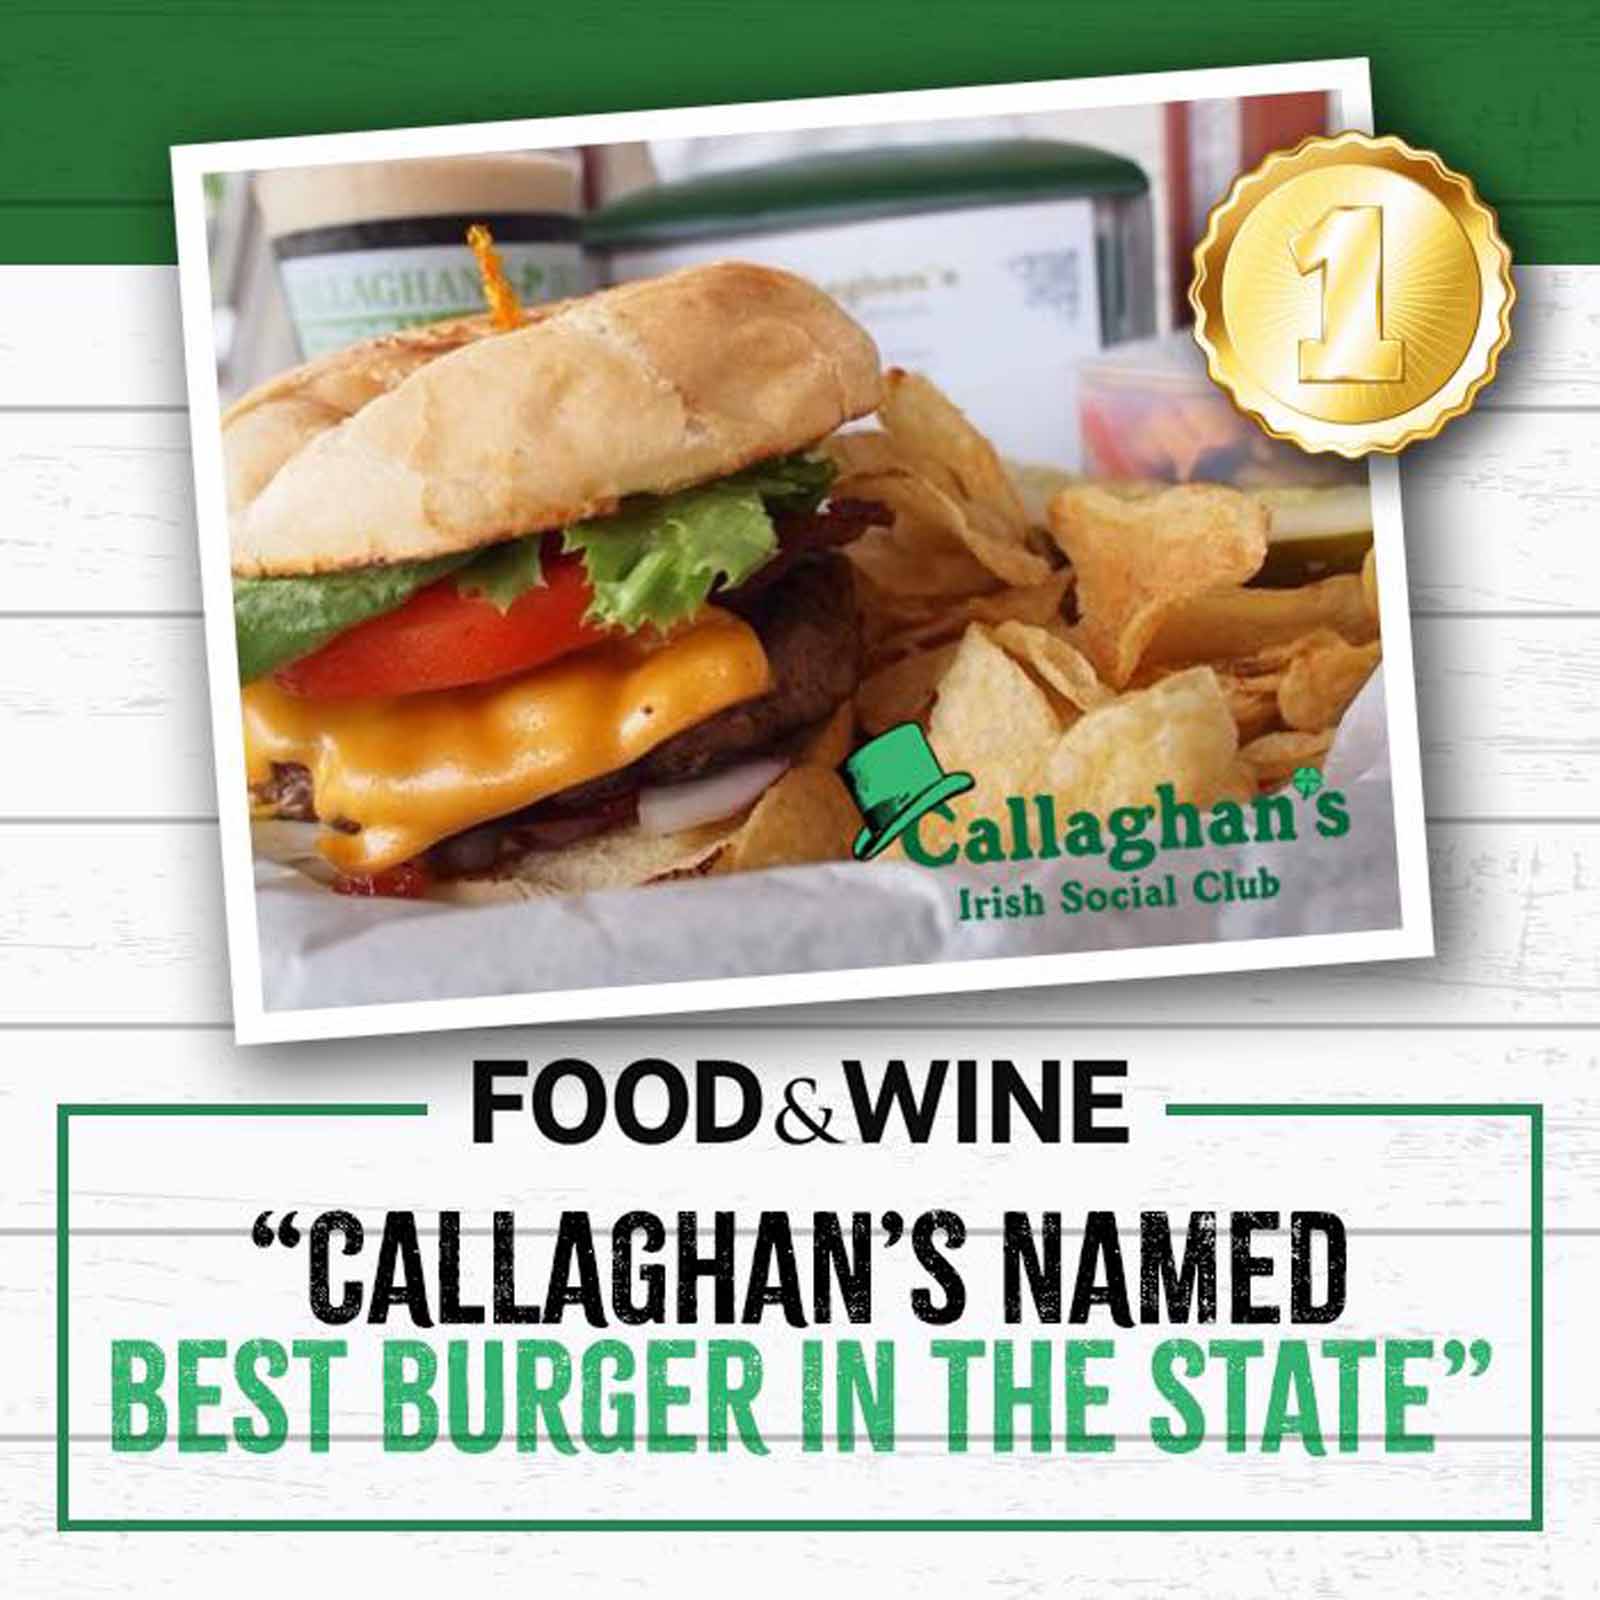 Callaghan&rsquo;s Has Best Burger In The State Per <em>Food &amp; Wine</em>